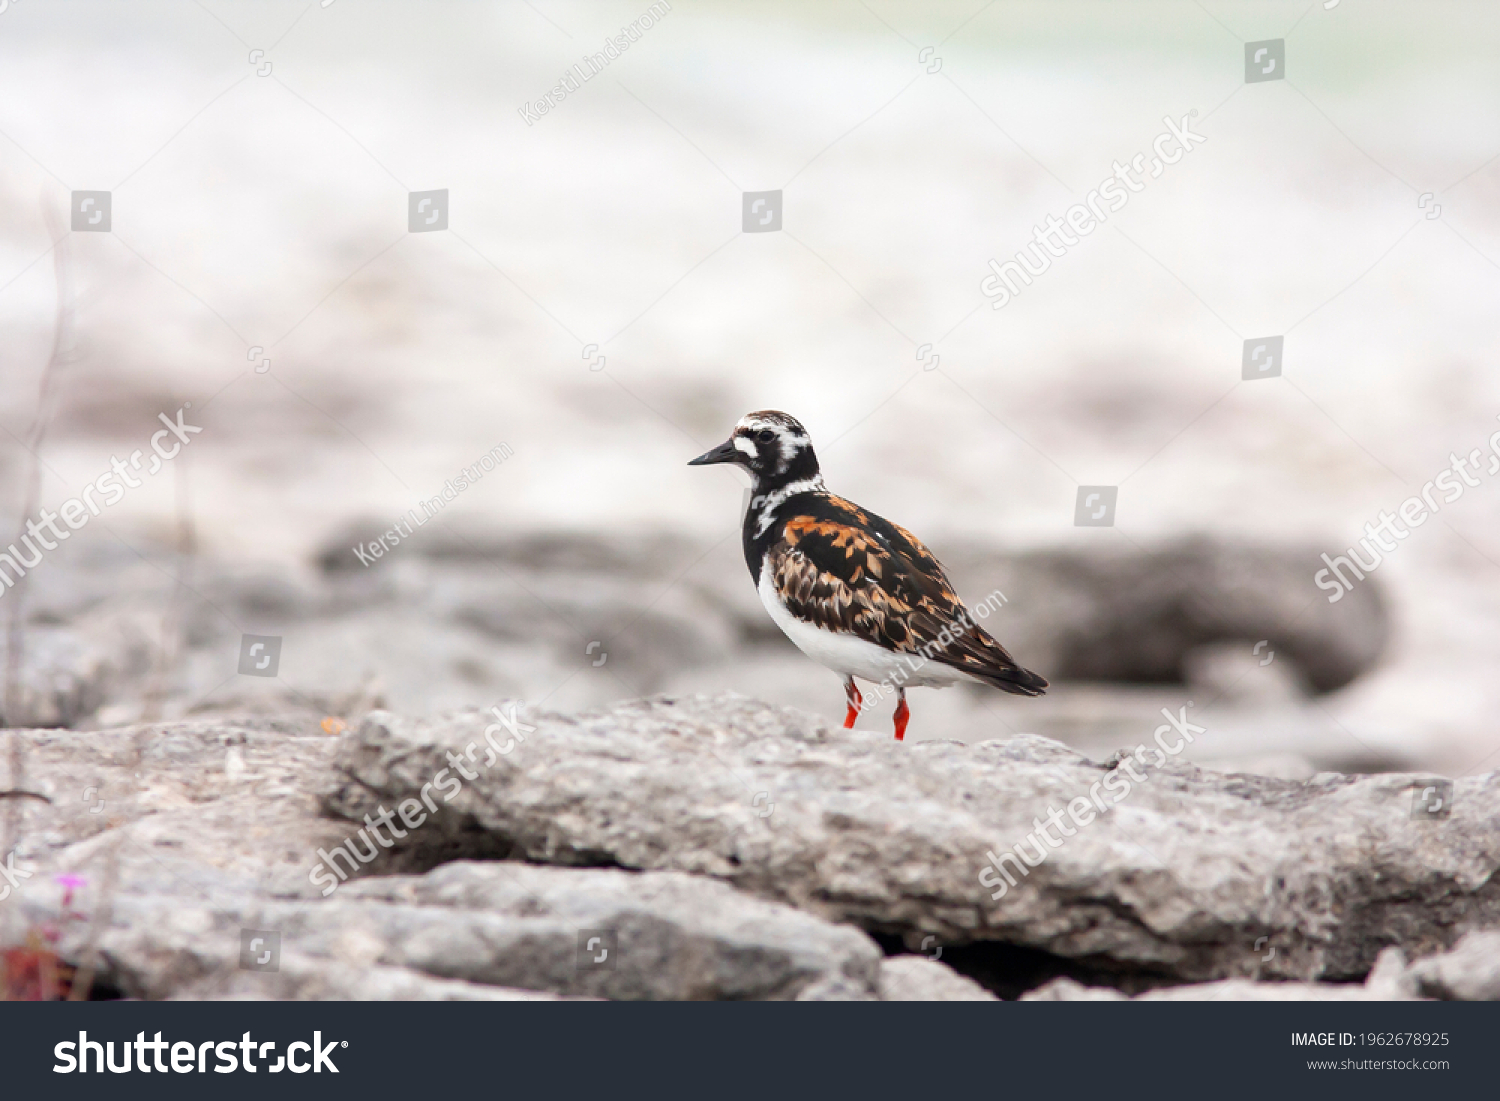 Medium-sized wader ruddy turnstone, Arenaria interpres standing on a stony beach by the Baltic Sea at Gotland island, Sweden, Europe #1962678925